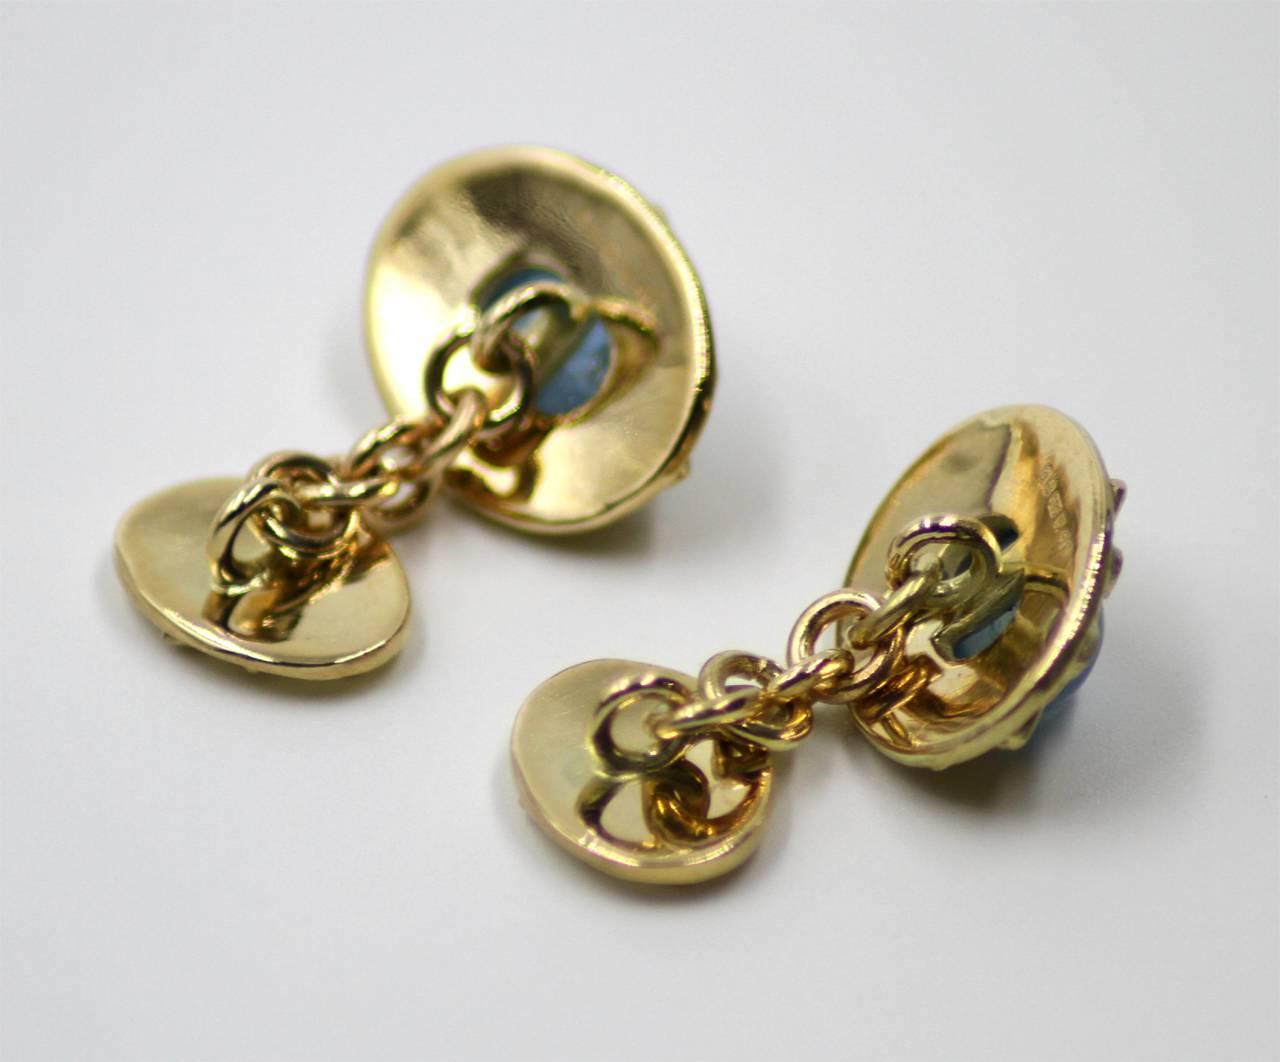 Aquamarine set in 18kt yellow gold cufflinks with matching patterned borders and matching front and backs.